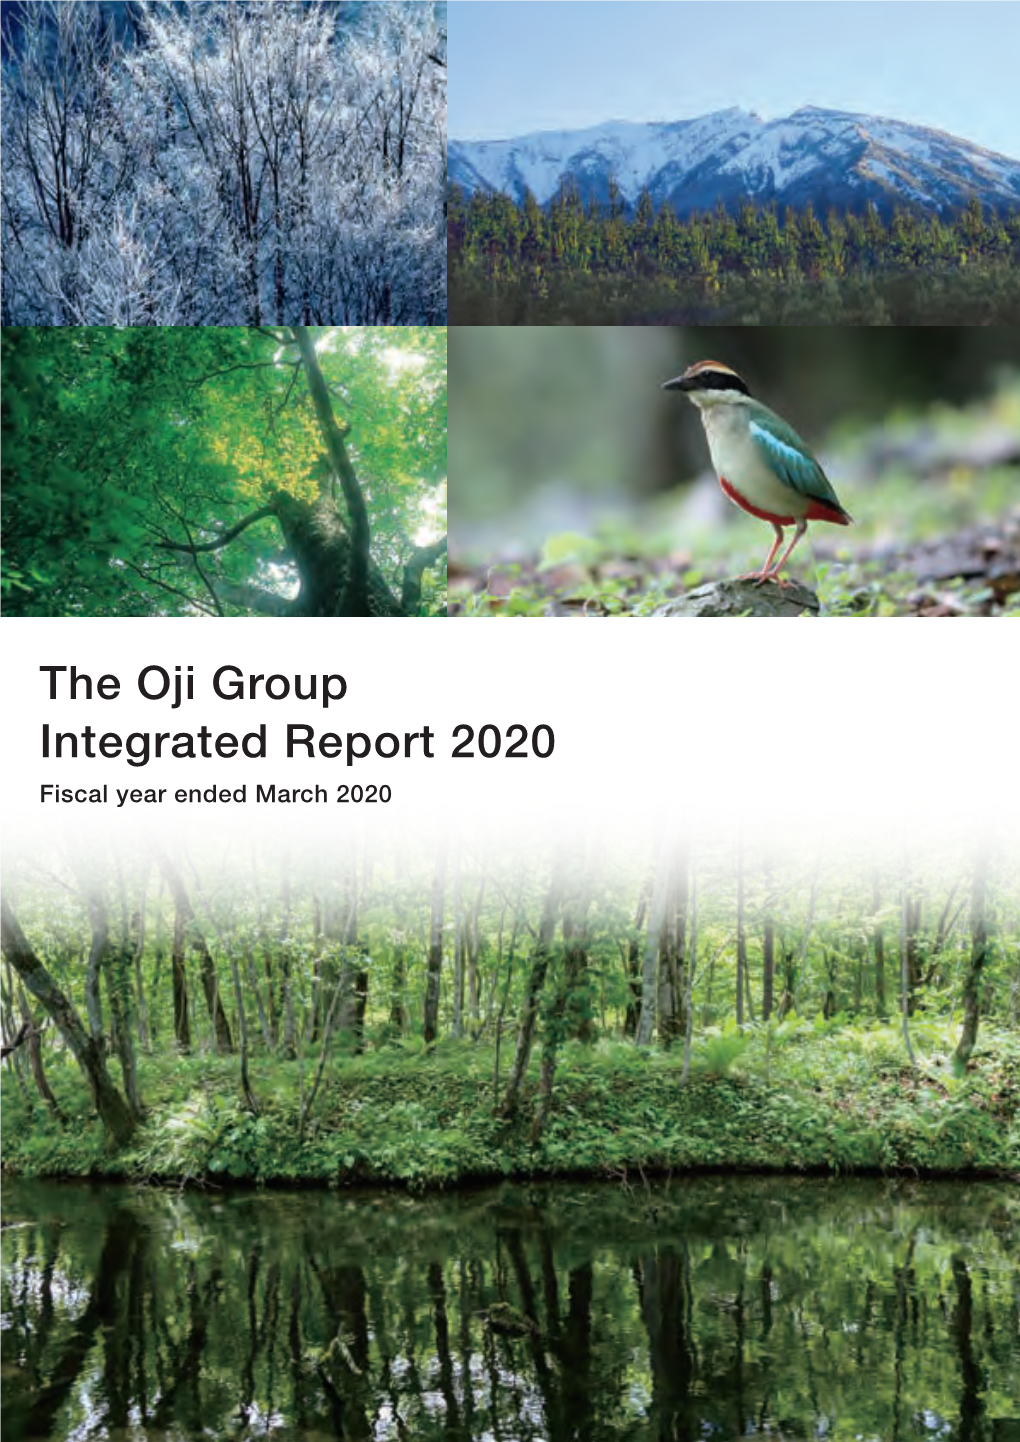 The Oji Group Integrated Report 2020